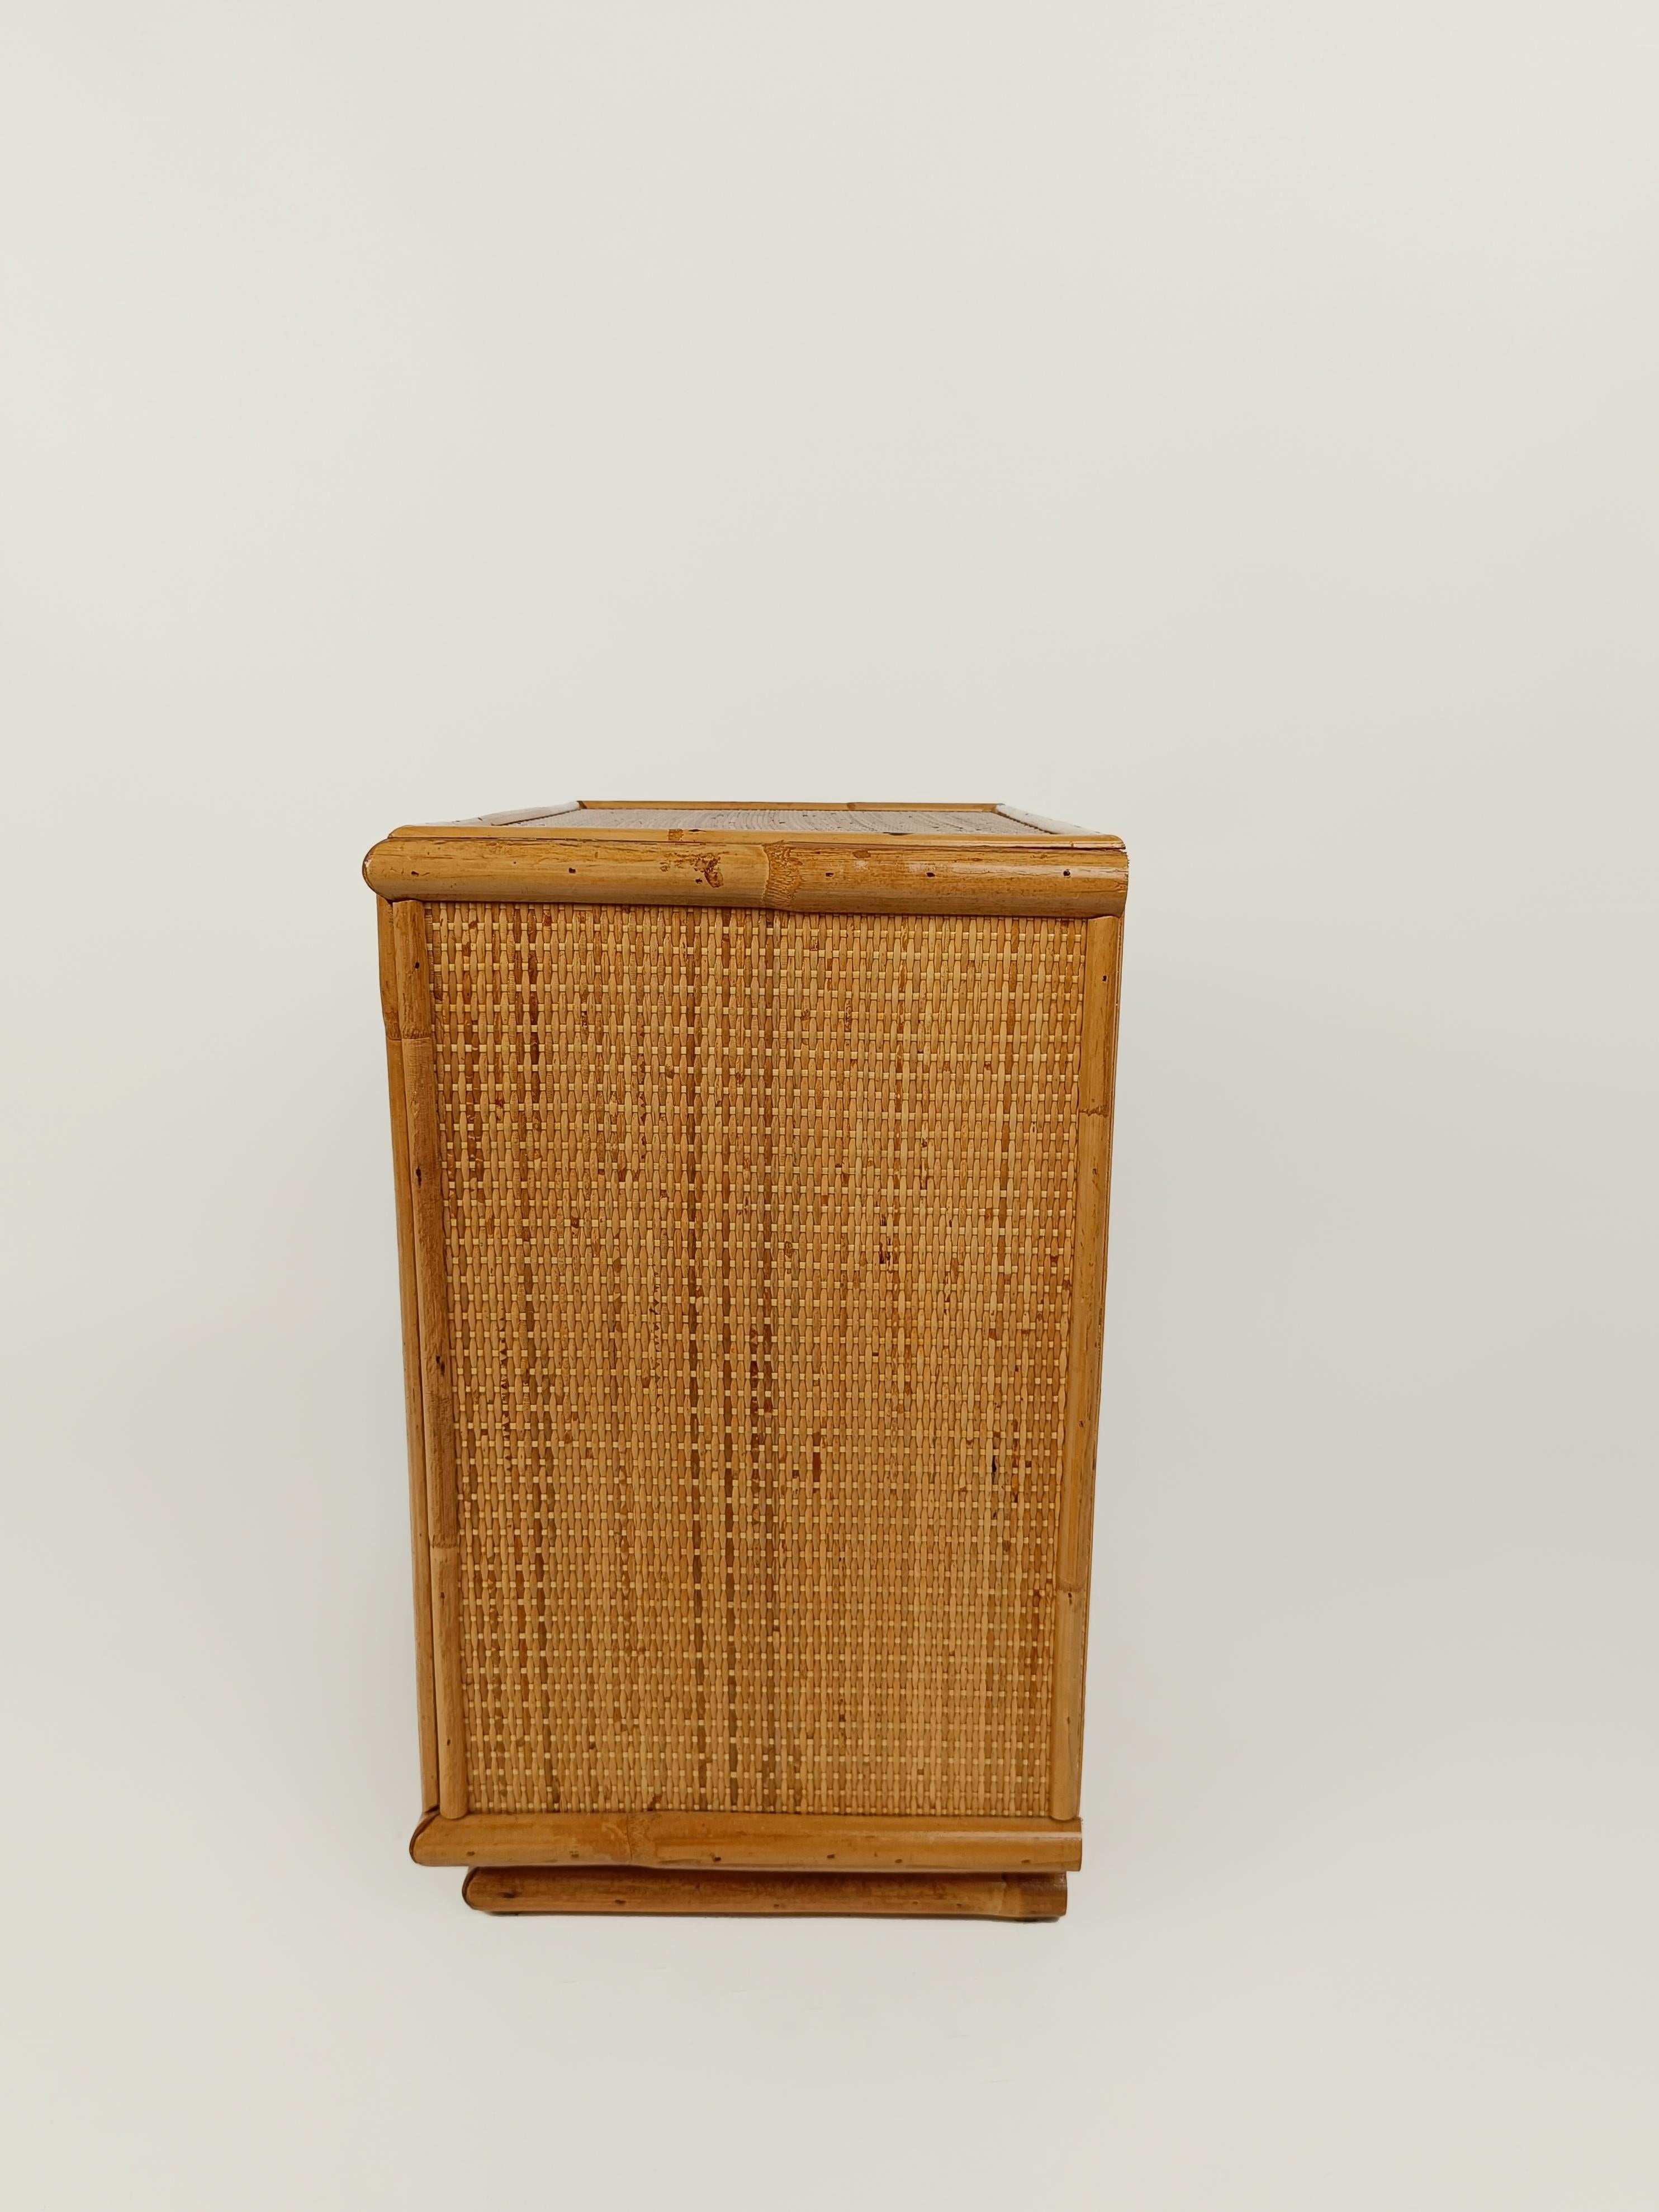 Pair of Italian MIdCentury Night Stand in Wicker Bamboo Cane and Rattan, 1970s  For Sale 2